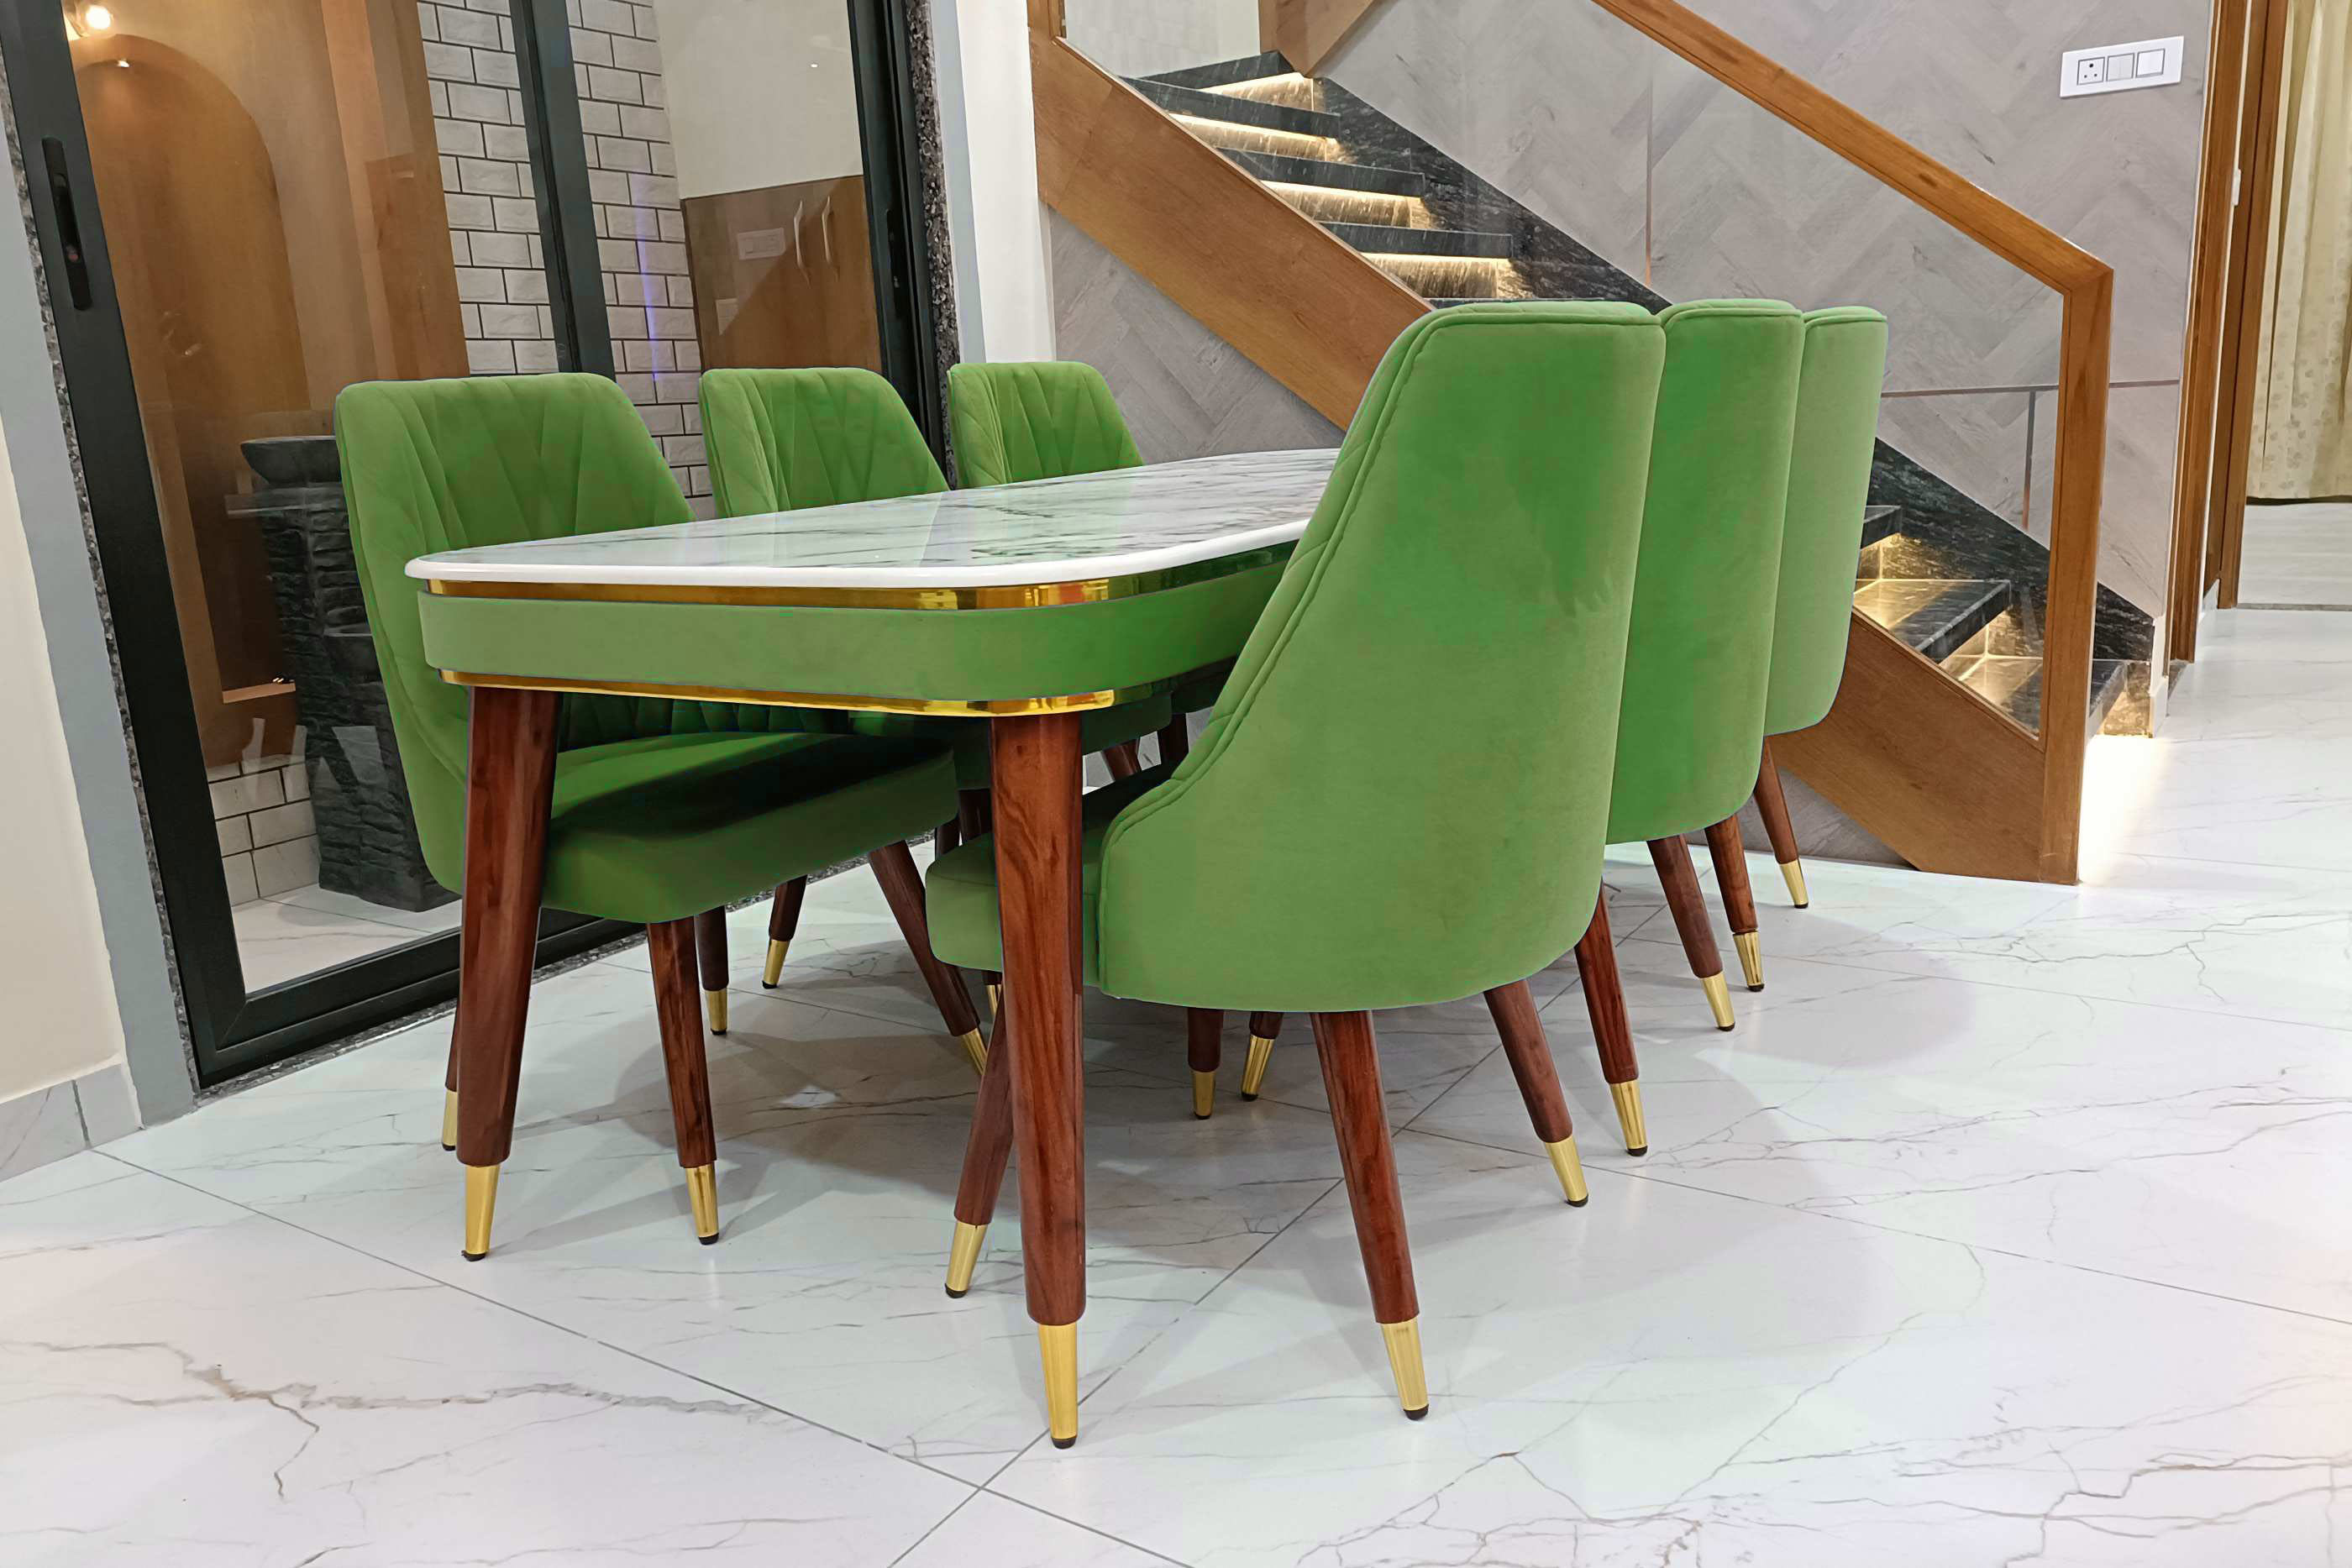 Solo green dining table set with 6 chairs